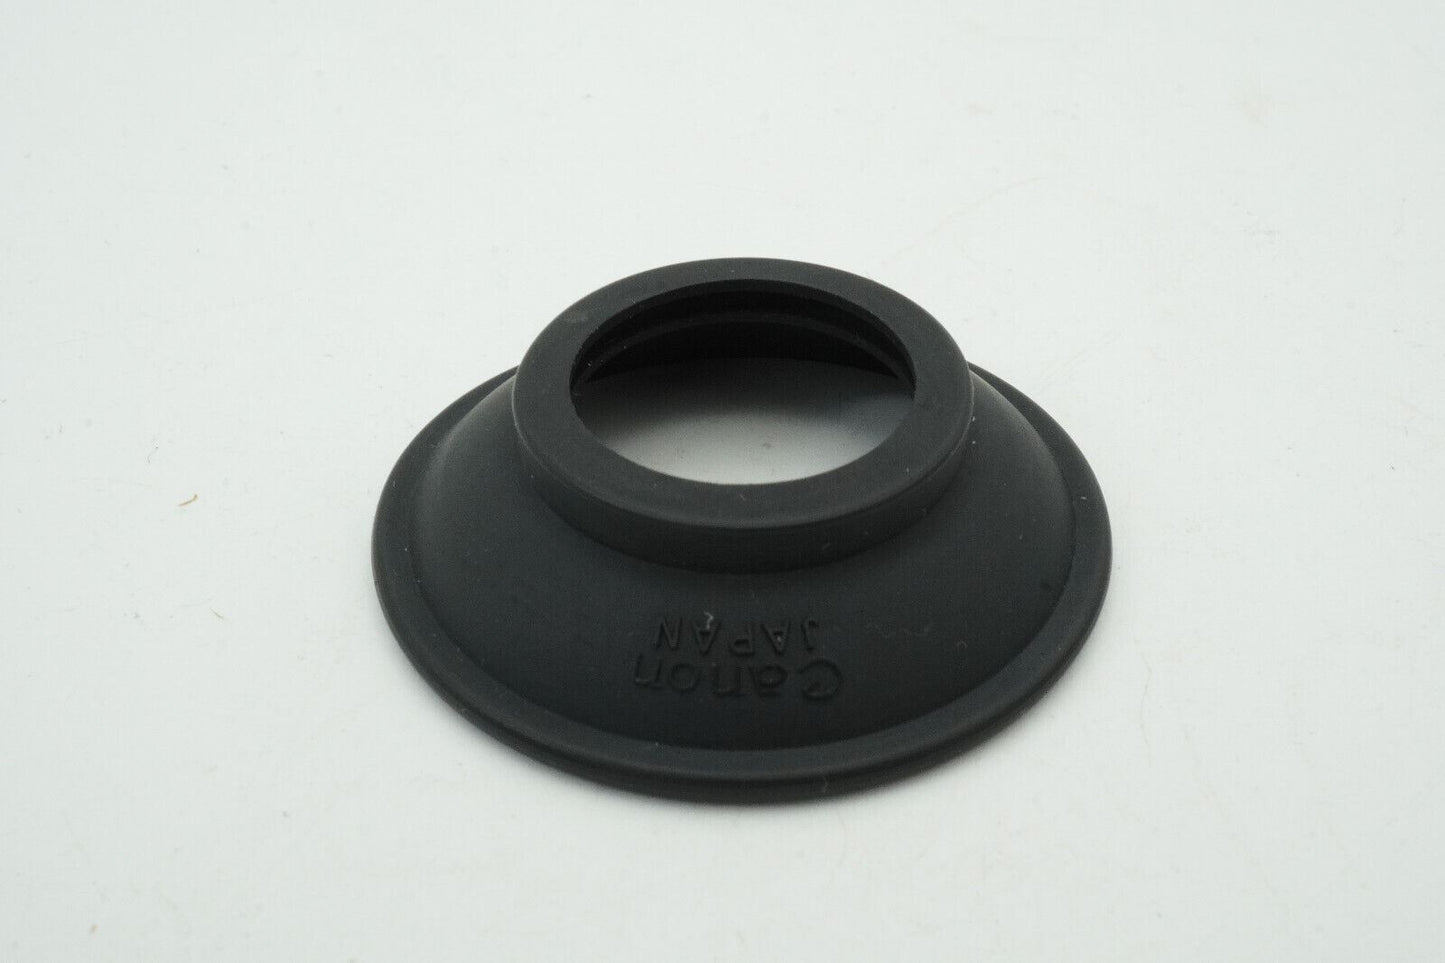 [RARE!] Canon F-1N F-1 Rubber Eyepiece Eyecup Round type camera from Japan #B156